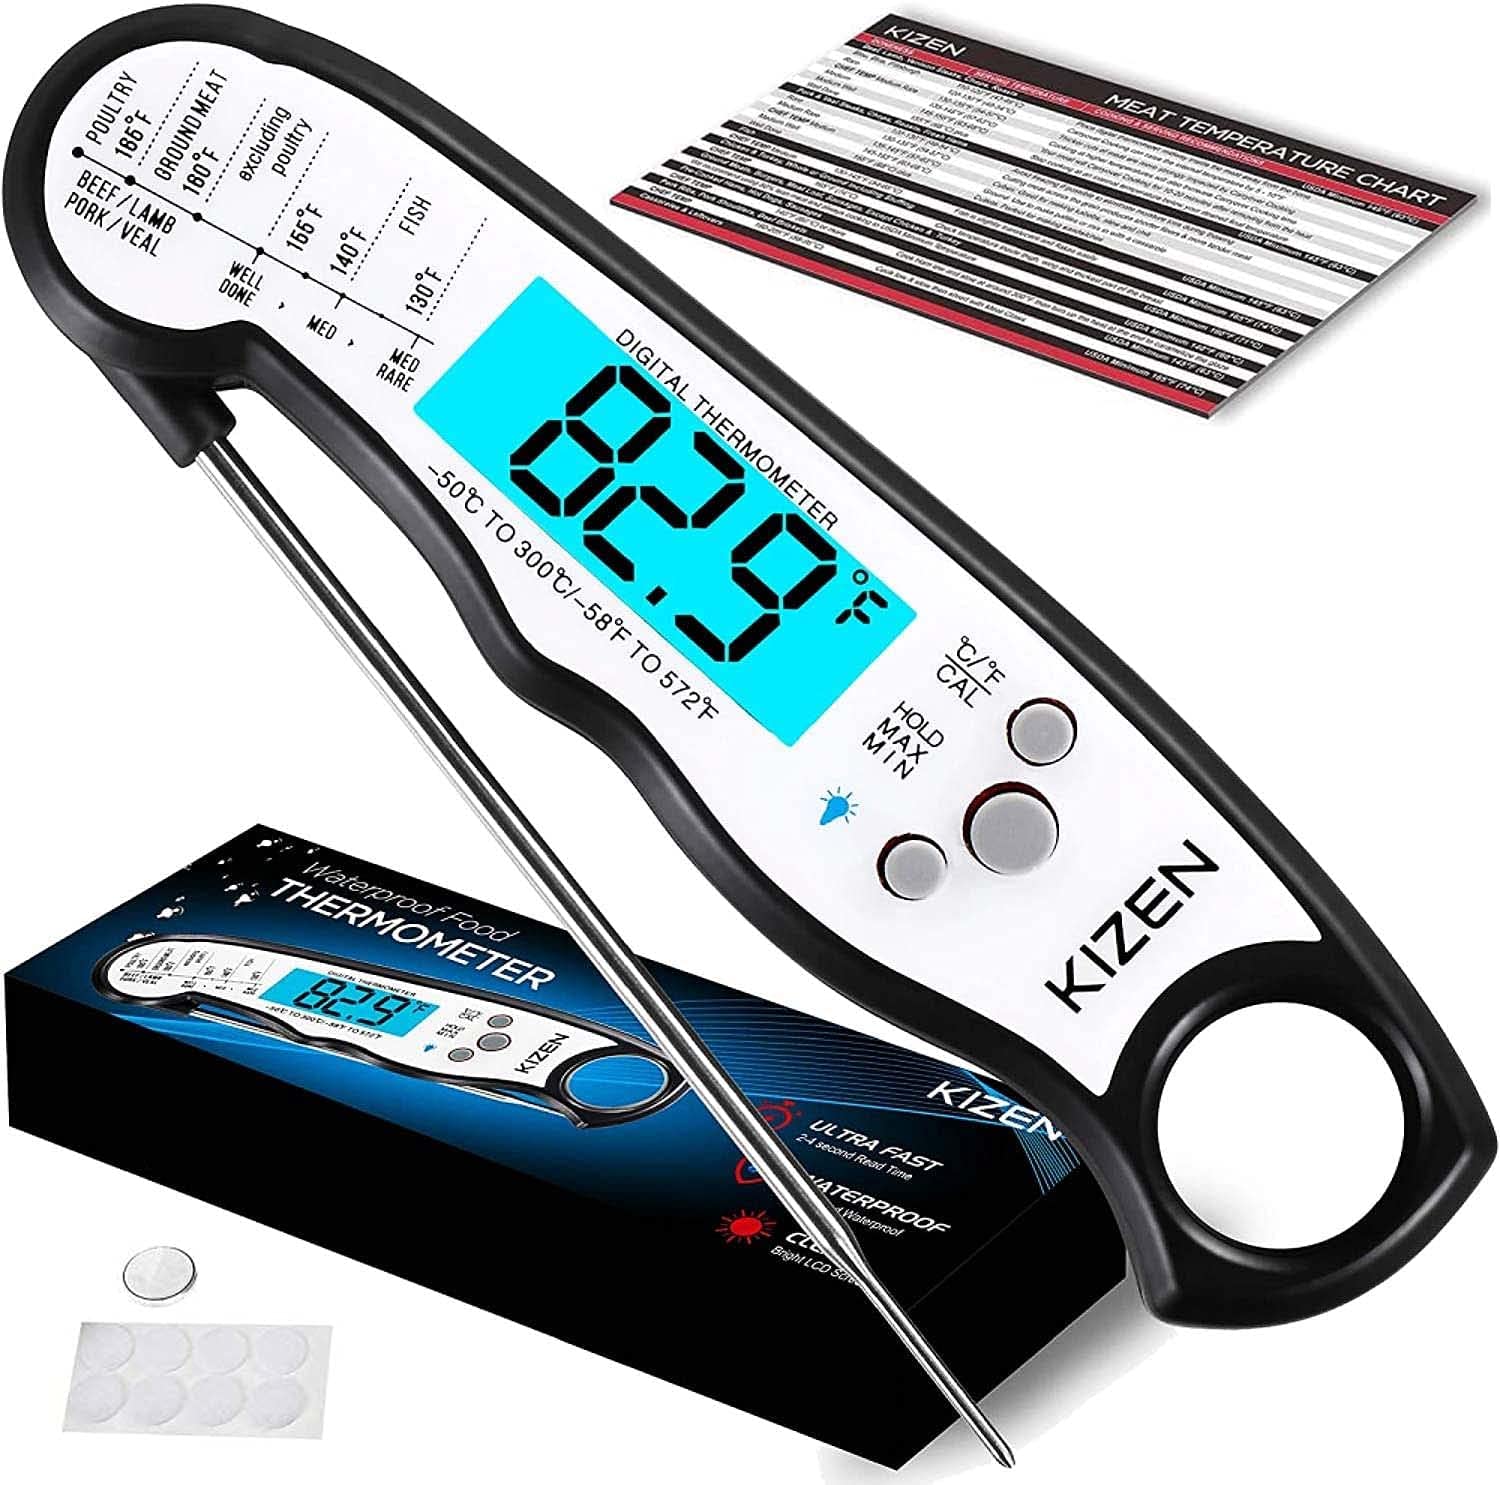 digital meat thermometer shown with accessories